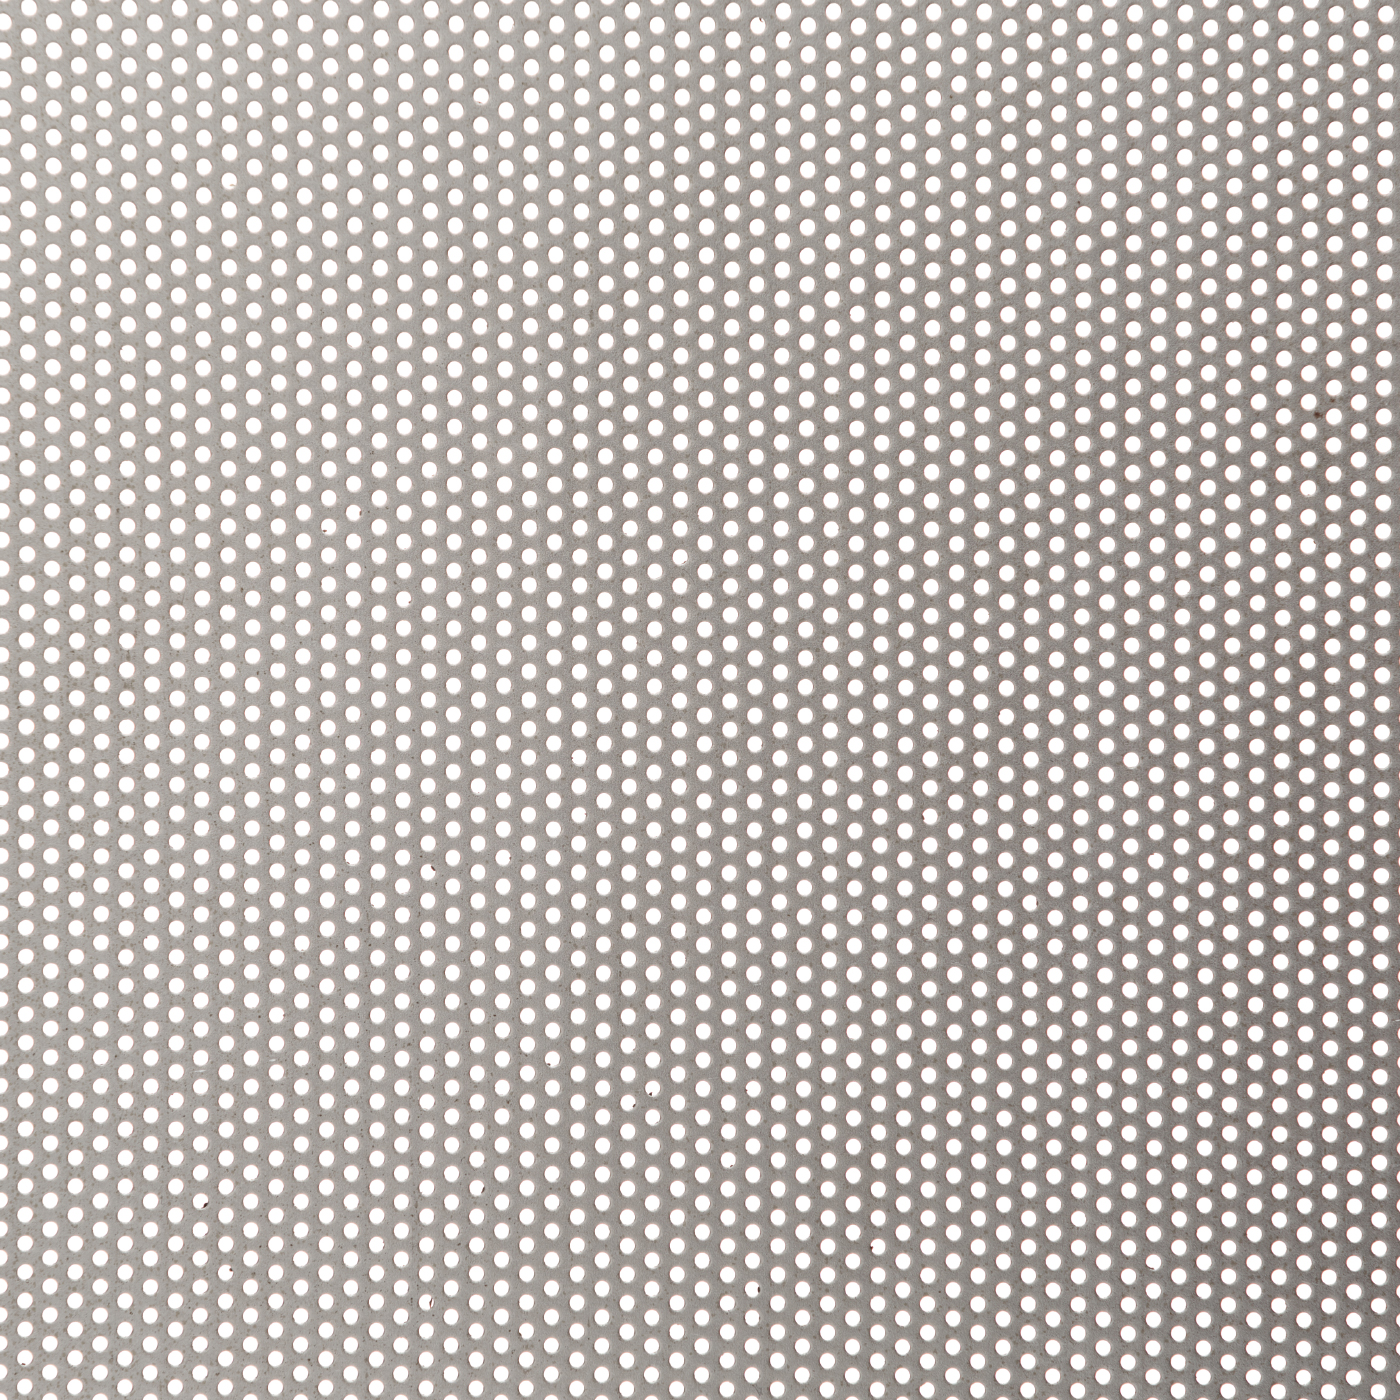 R01623 Perforated Metal Sheet: 1.6mm Round, 23% Open Area ...